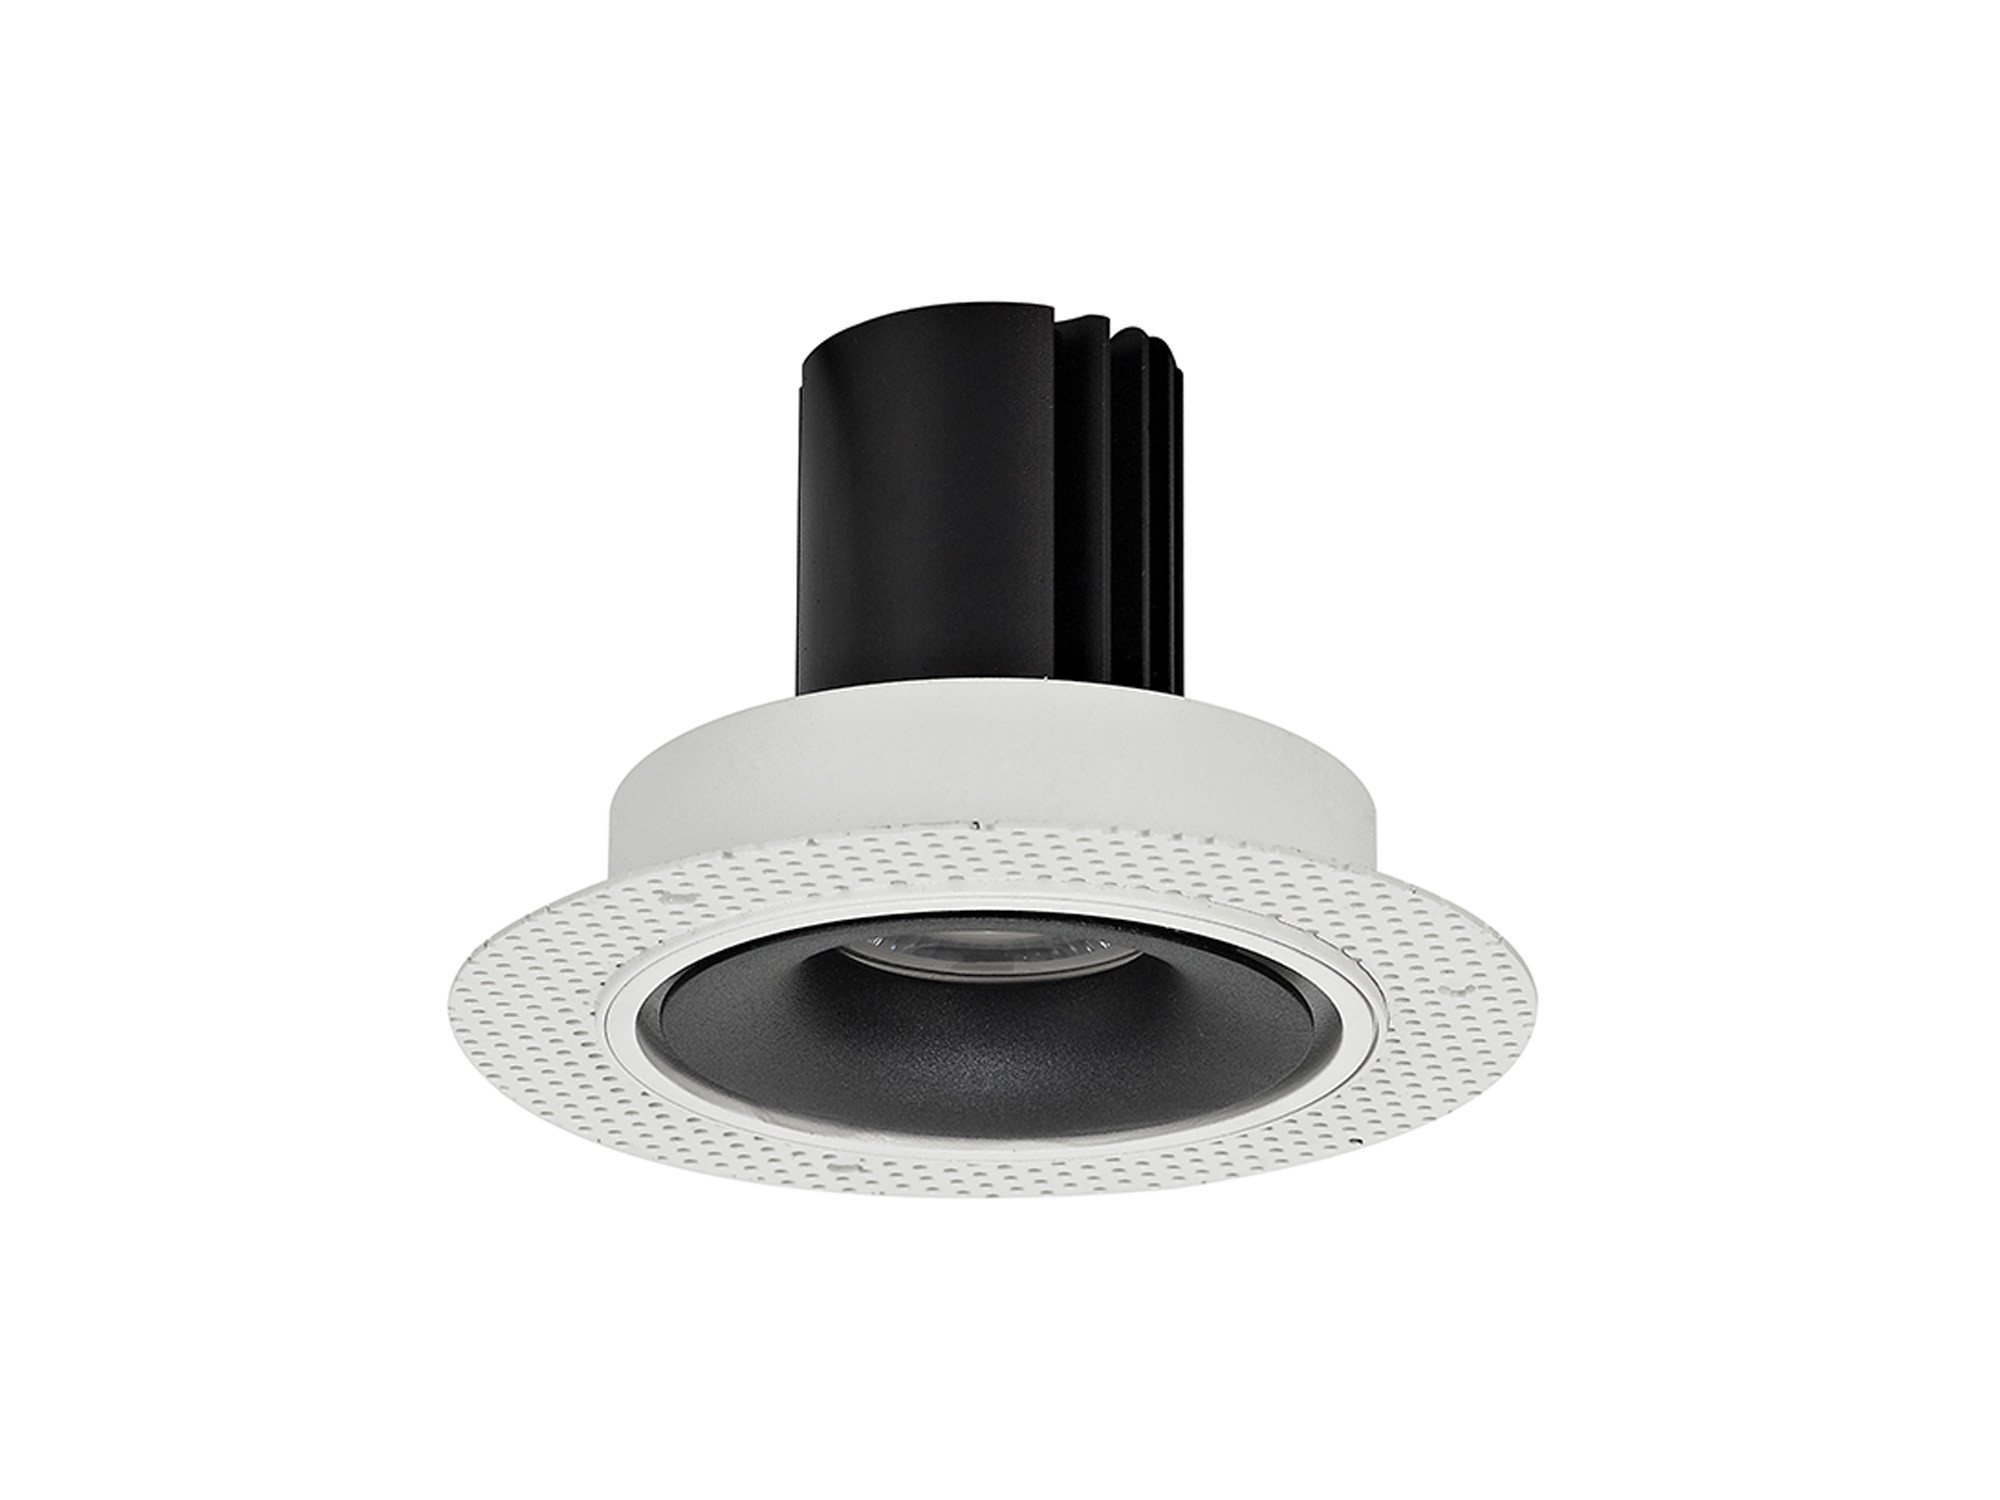 DM202171  Bolor T 12 Tridonic Powered 12W 2700K 1200lm 12° CRI>90 LED Engine White/Black Trimless Fixed Recessed Spotlight, IP20